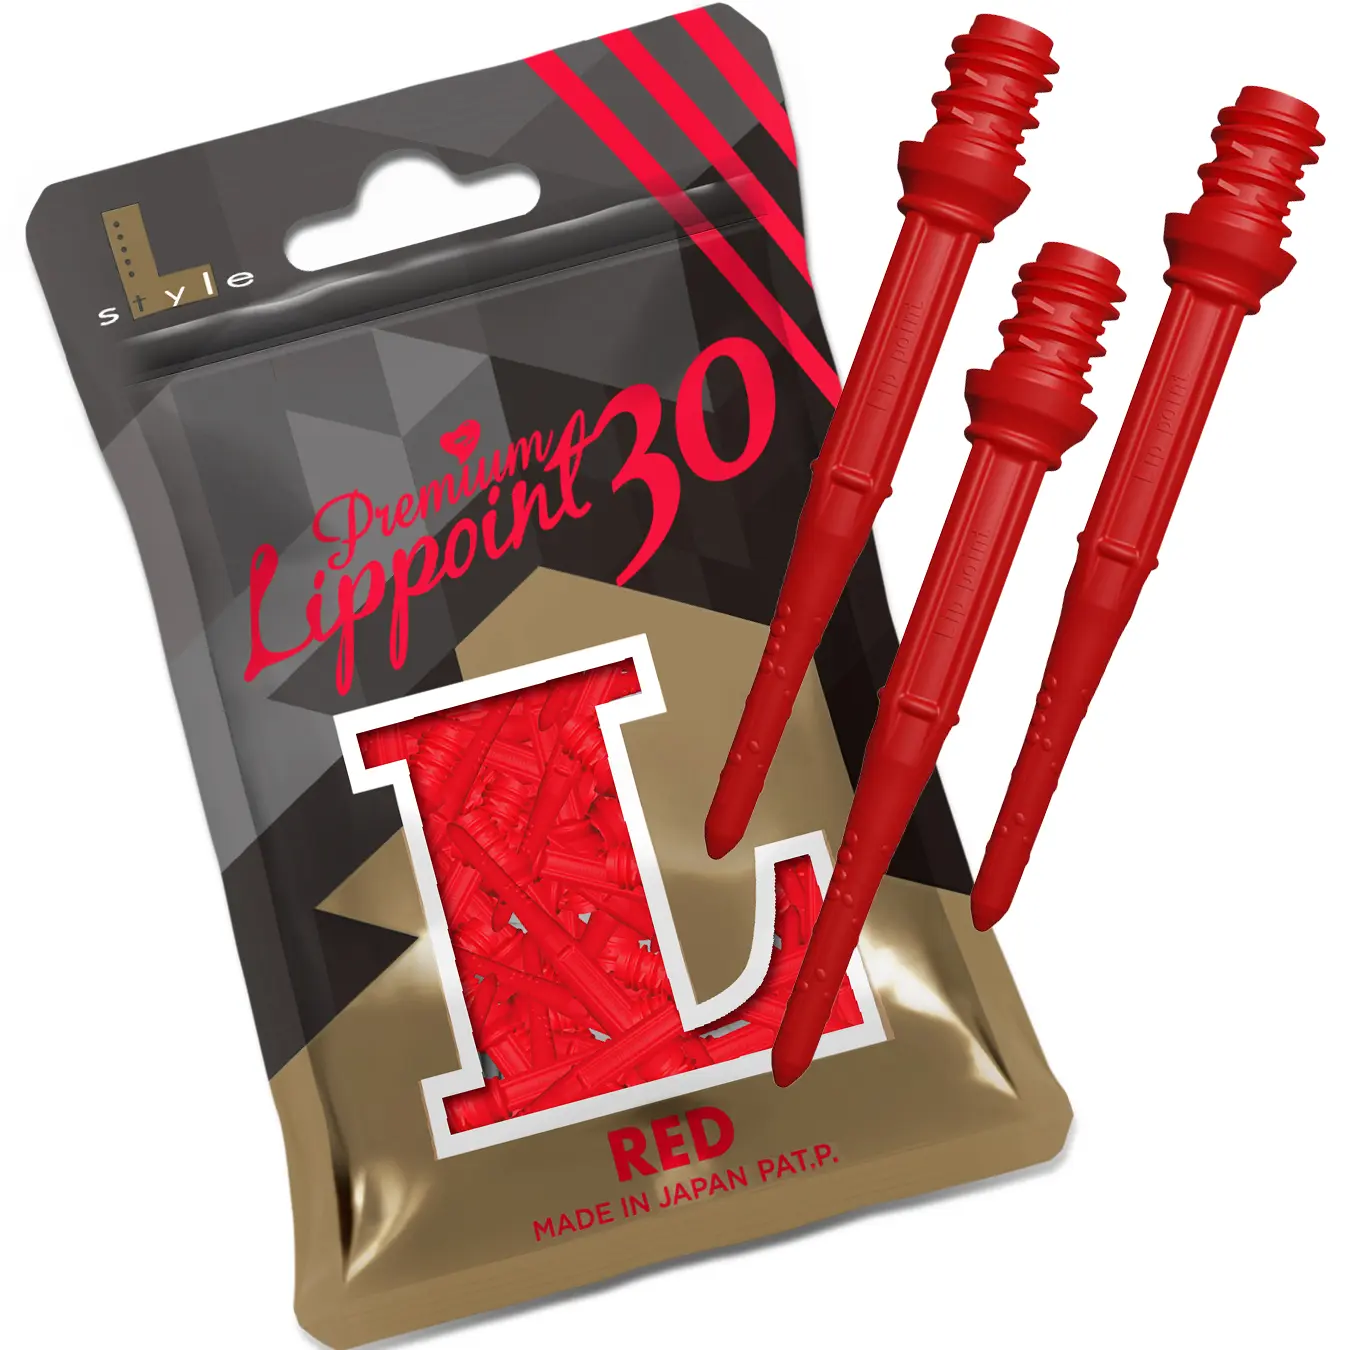 L-Style - Premium Lippoint Long - 30er Pack